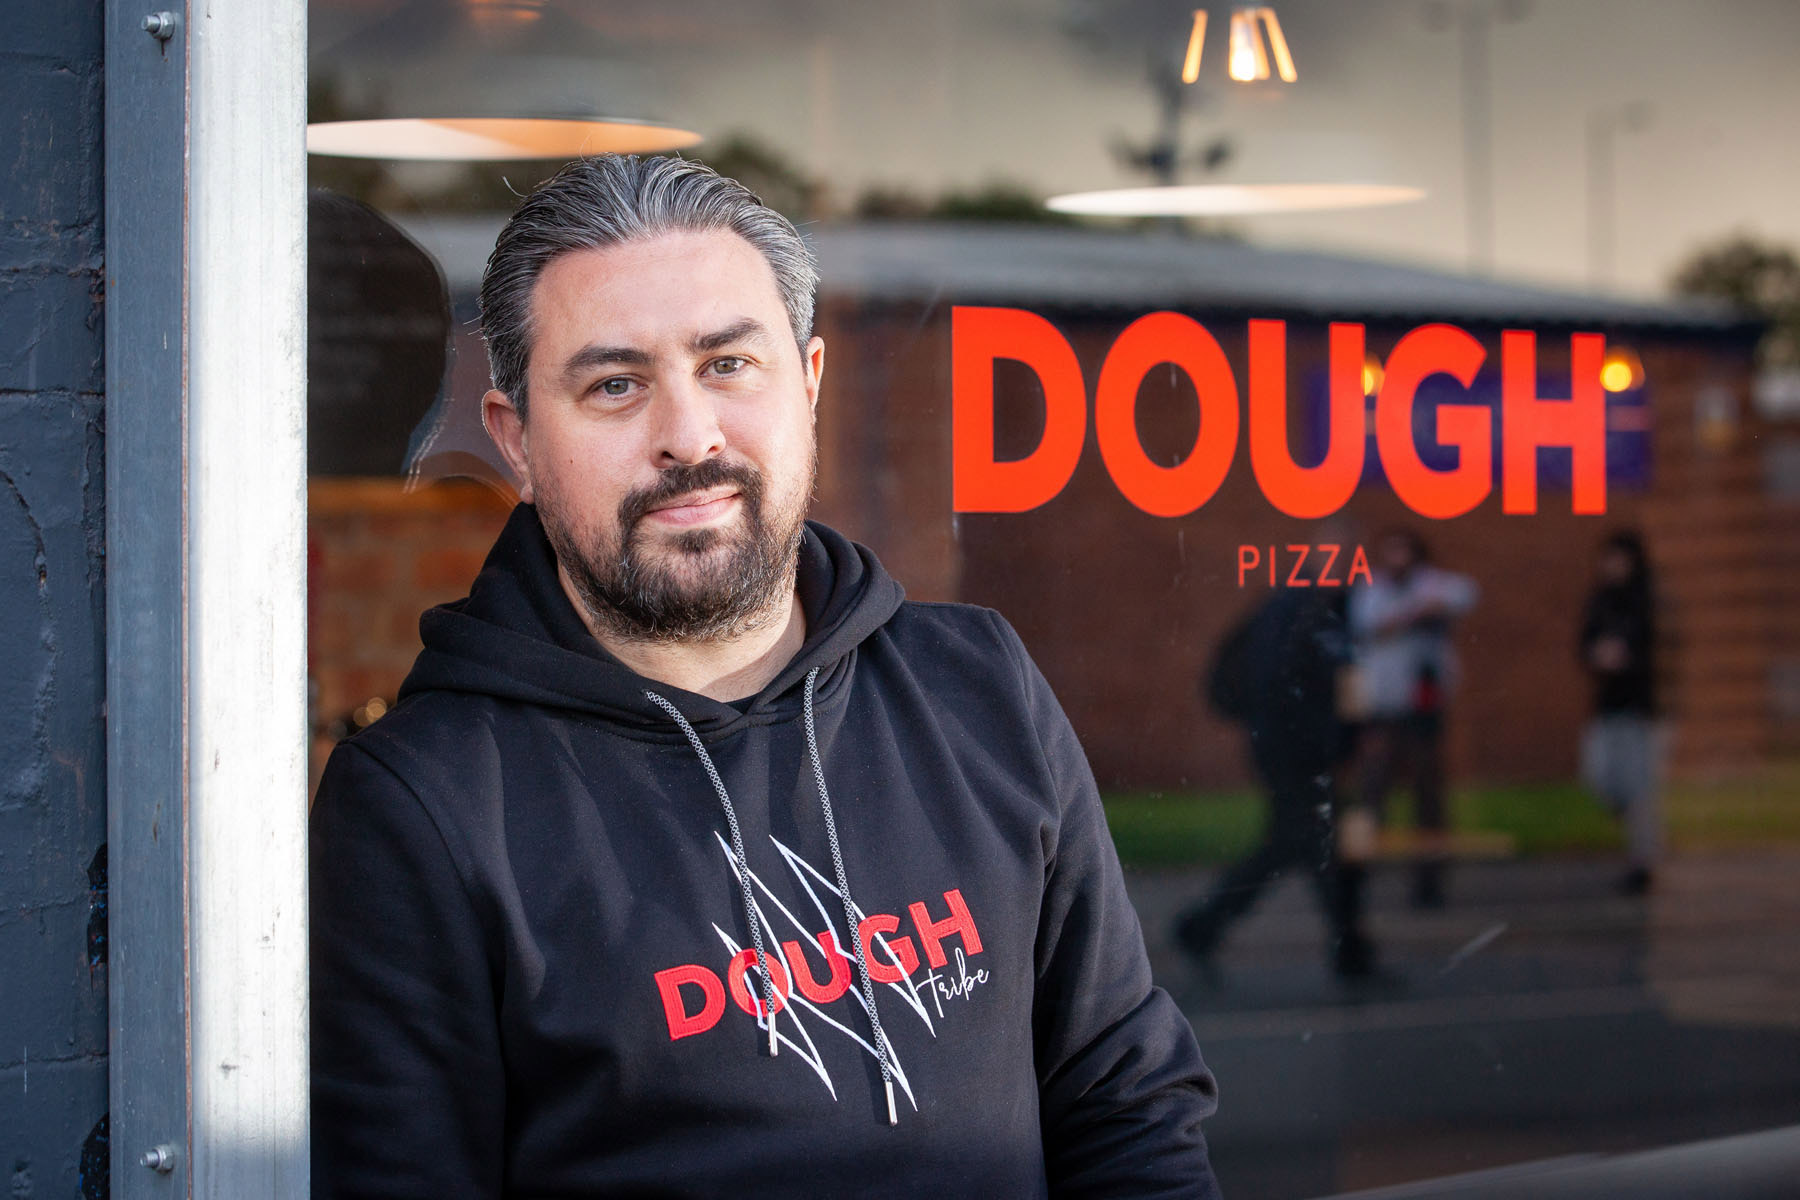 Customer Spotlight video: DOUGH pizzeria chain owner on the benefits of using Flipdish